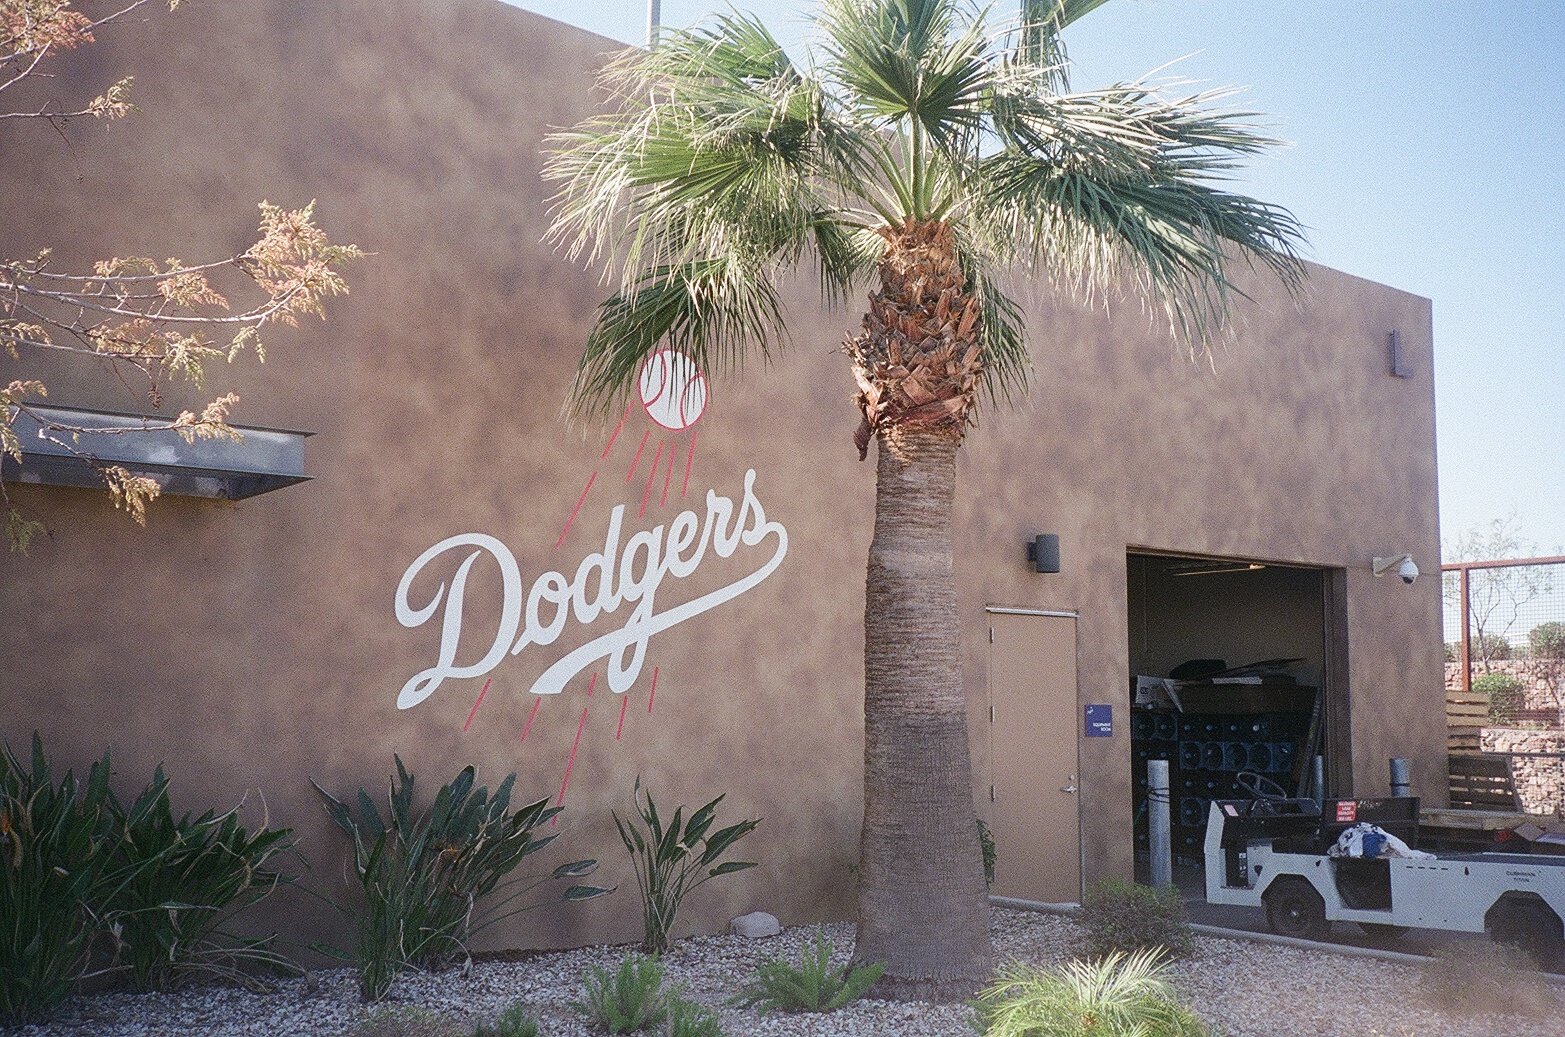 A palm tree stand in front of a tan building with "Dodgers" painted on the side. 